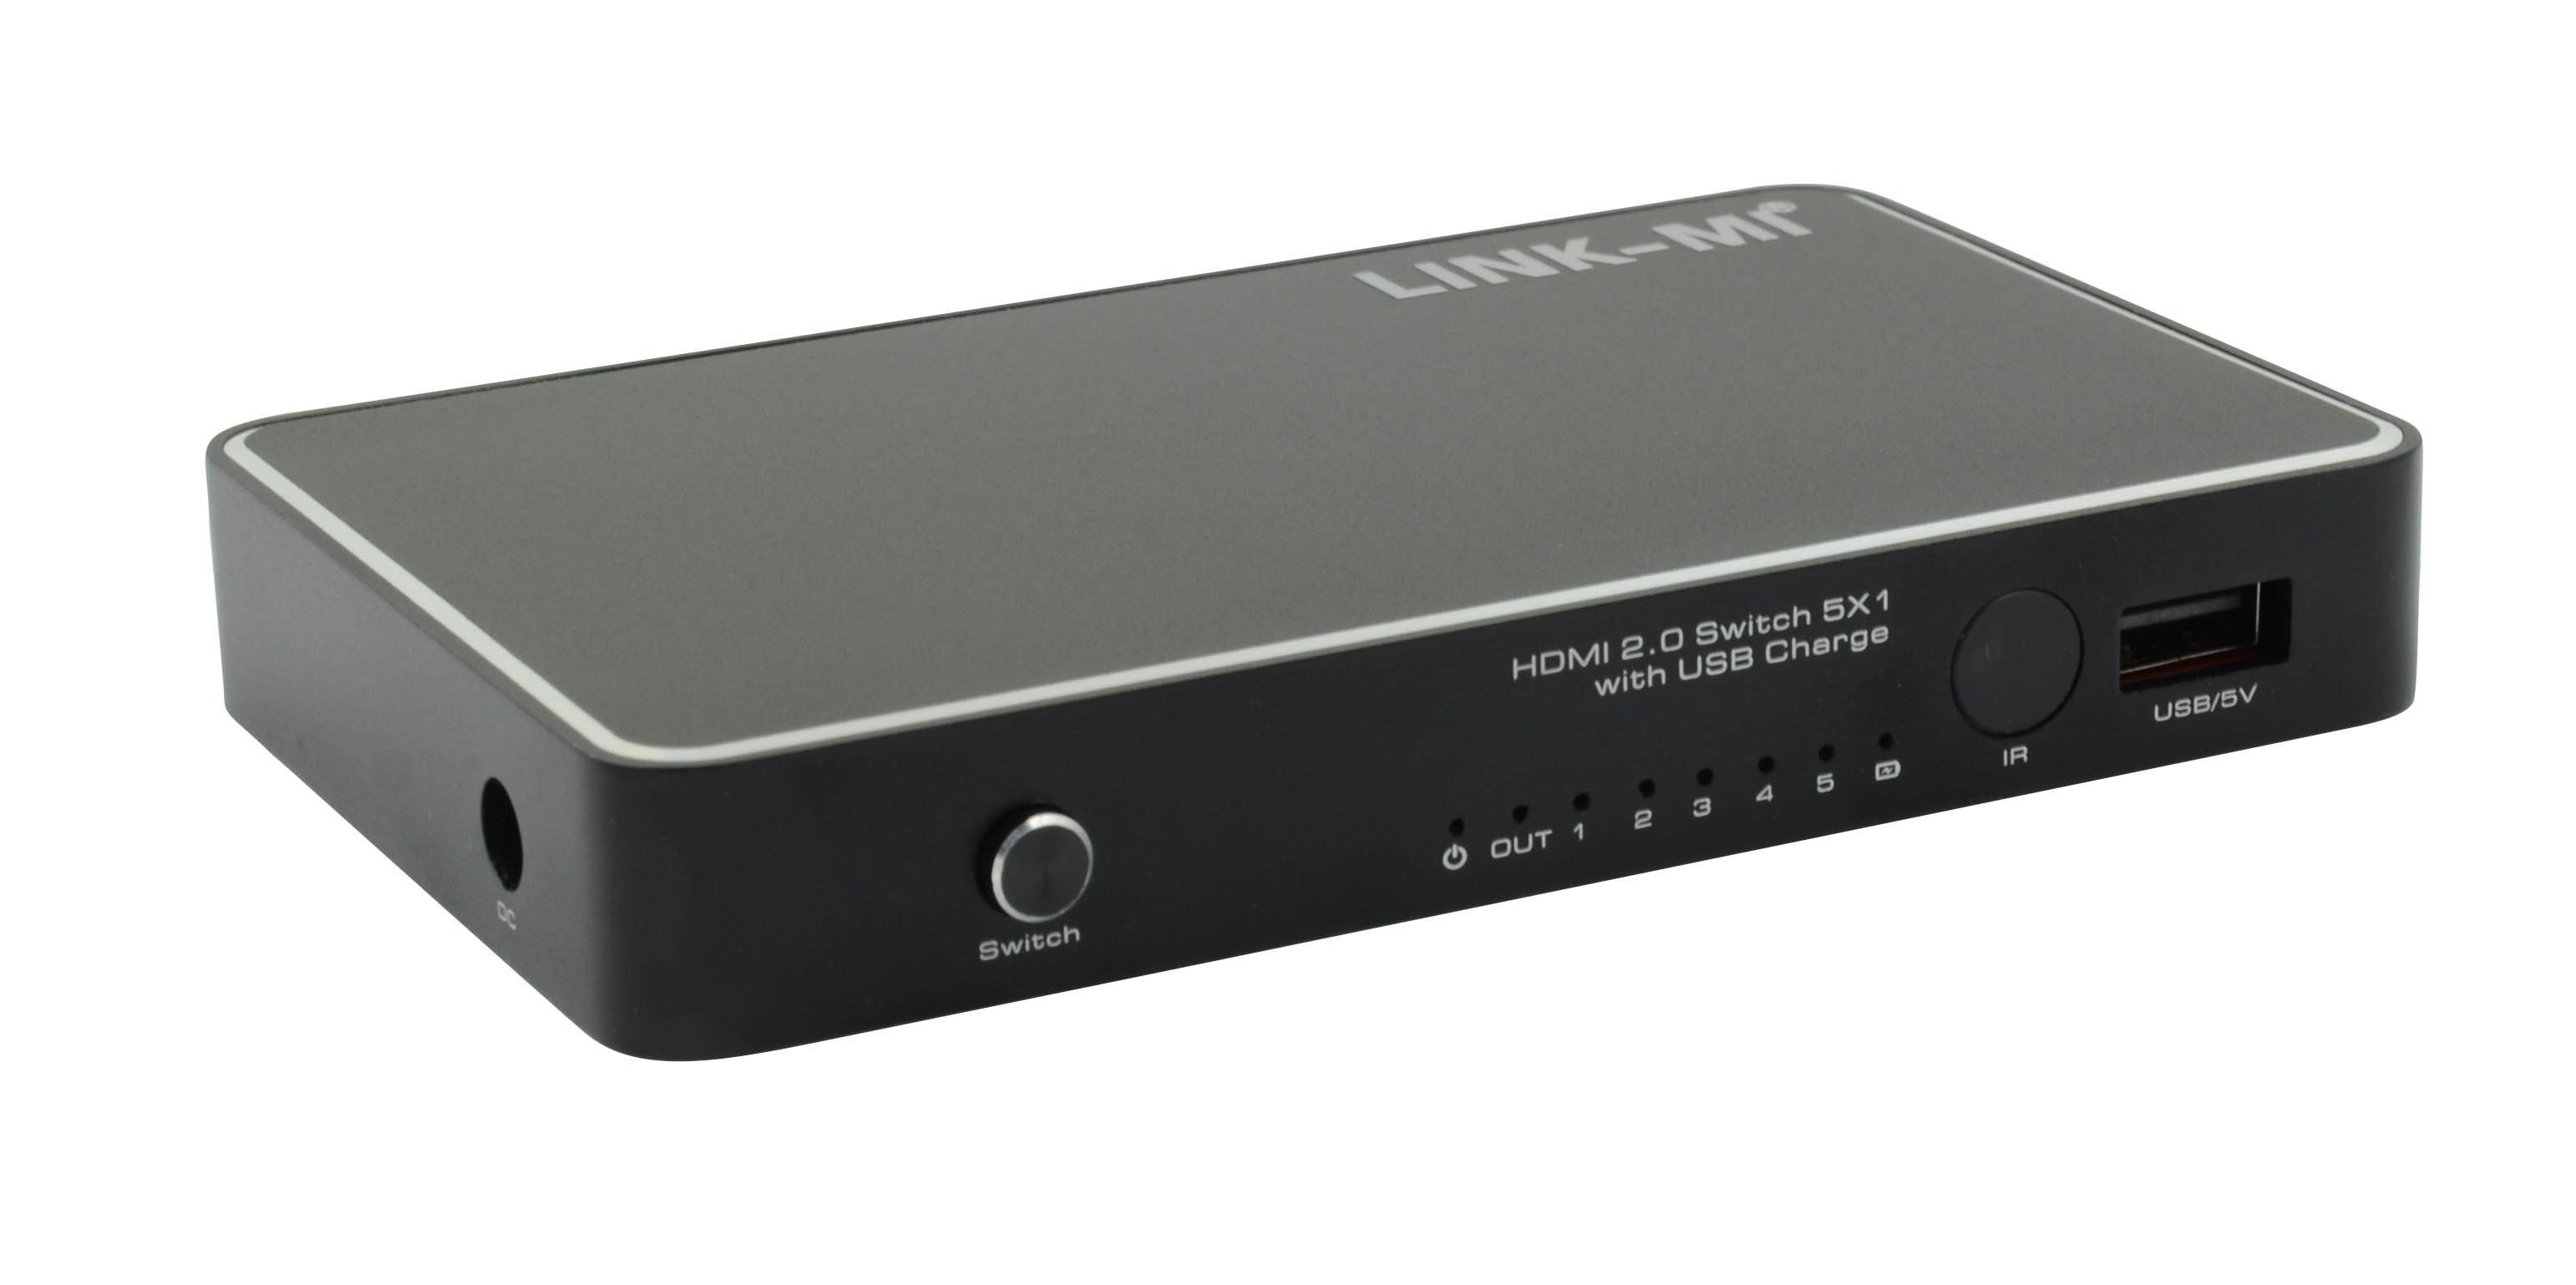 LINK-MI LM-2.0H501 HDMI2.0 5X1SWITCH withUSB Charge